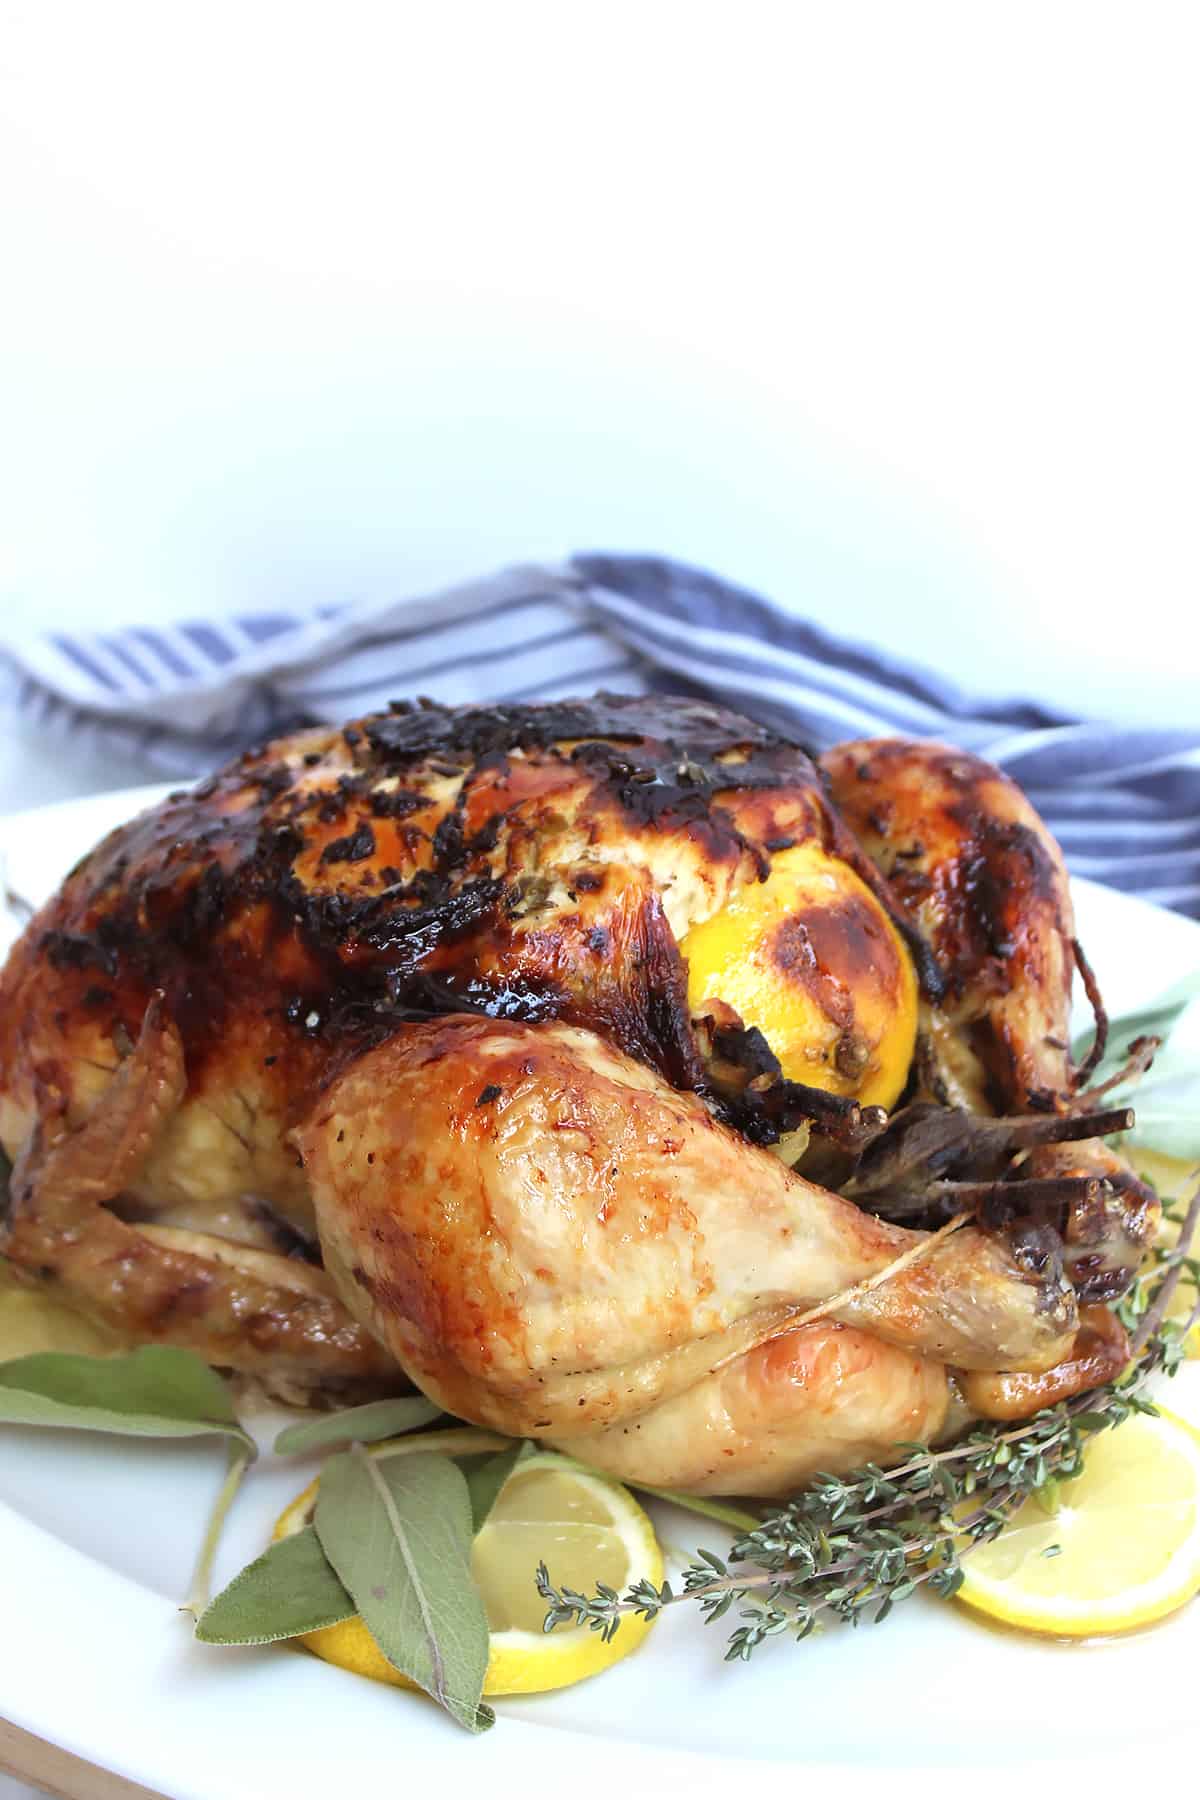 Roast chicken on a white platter with lemon and herbs